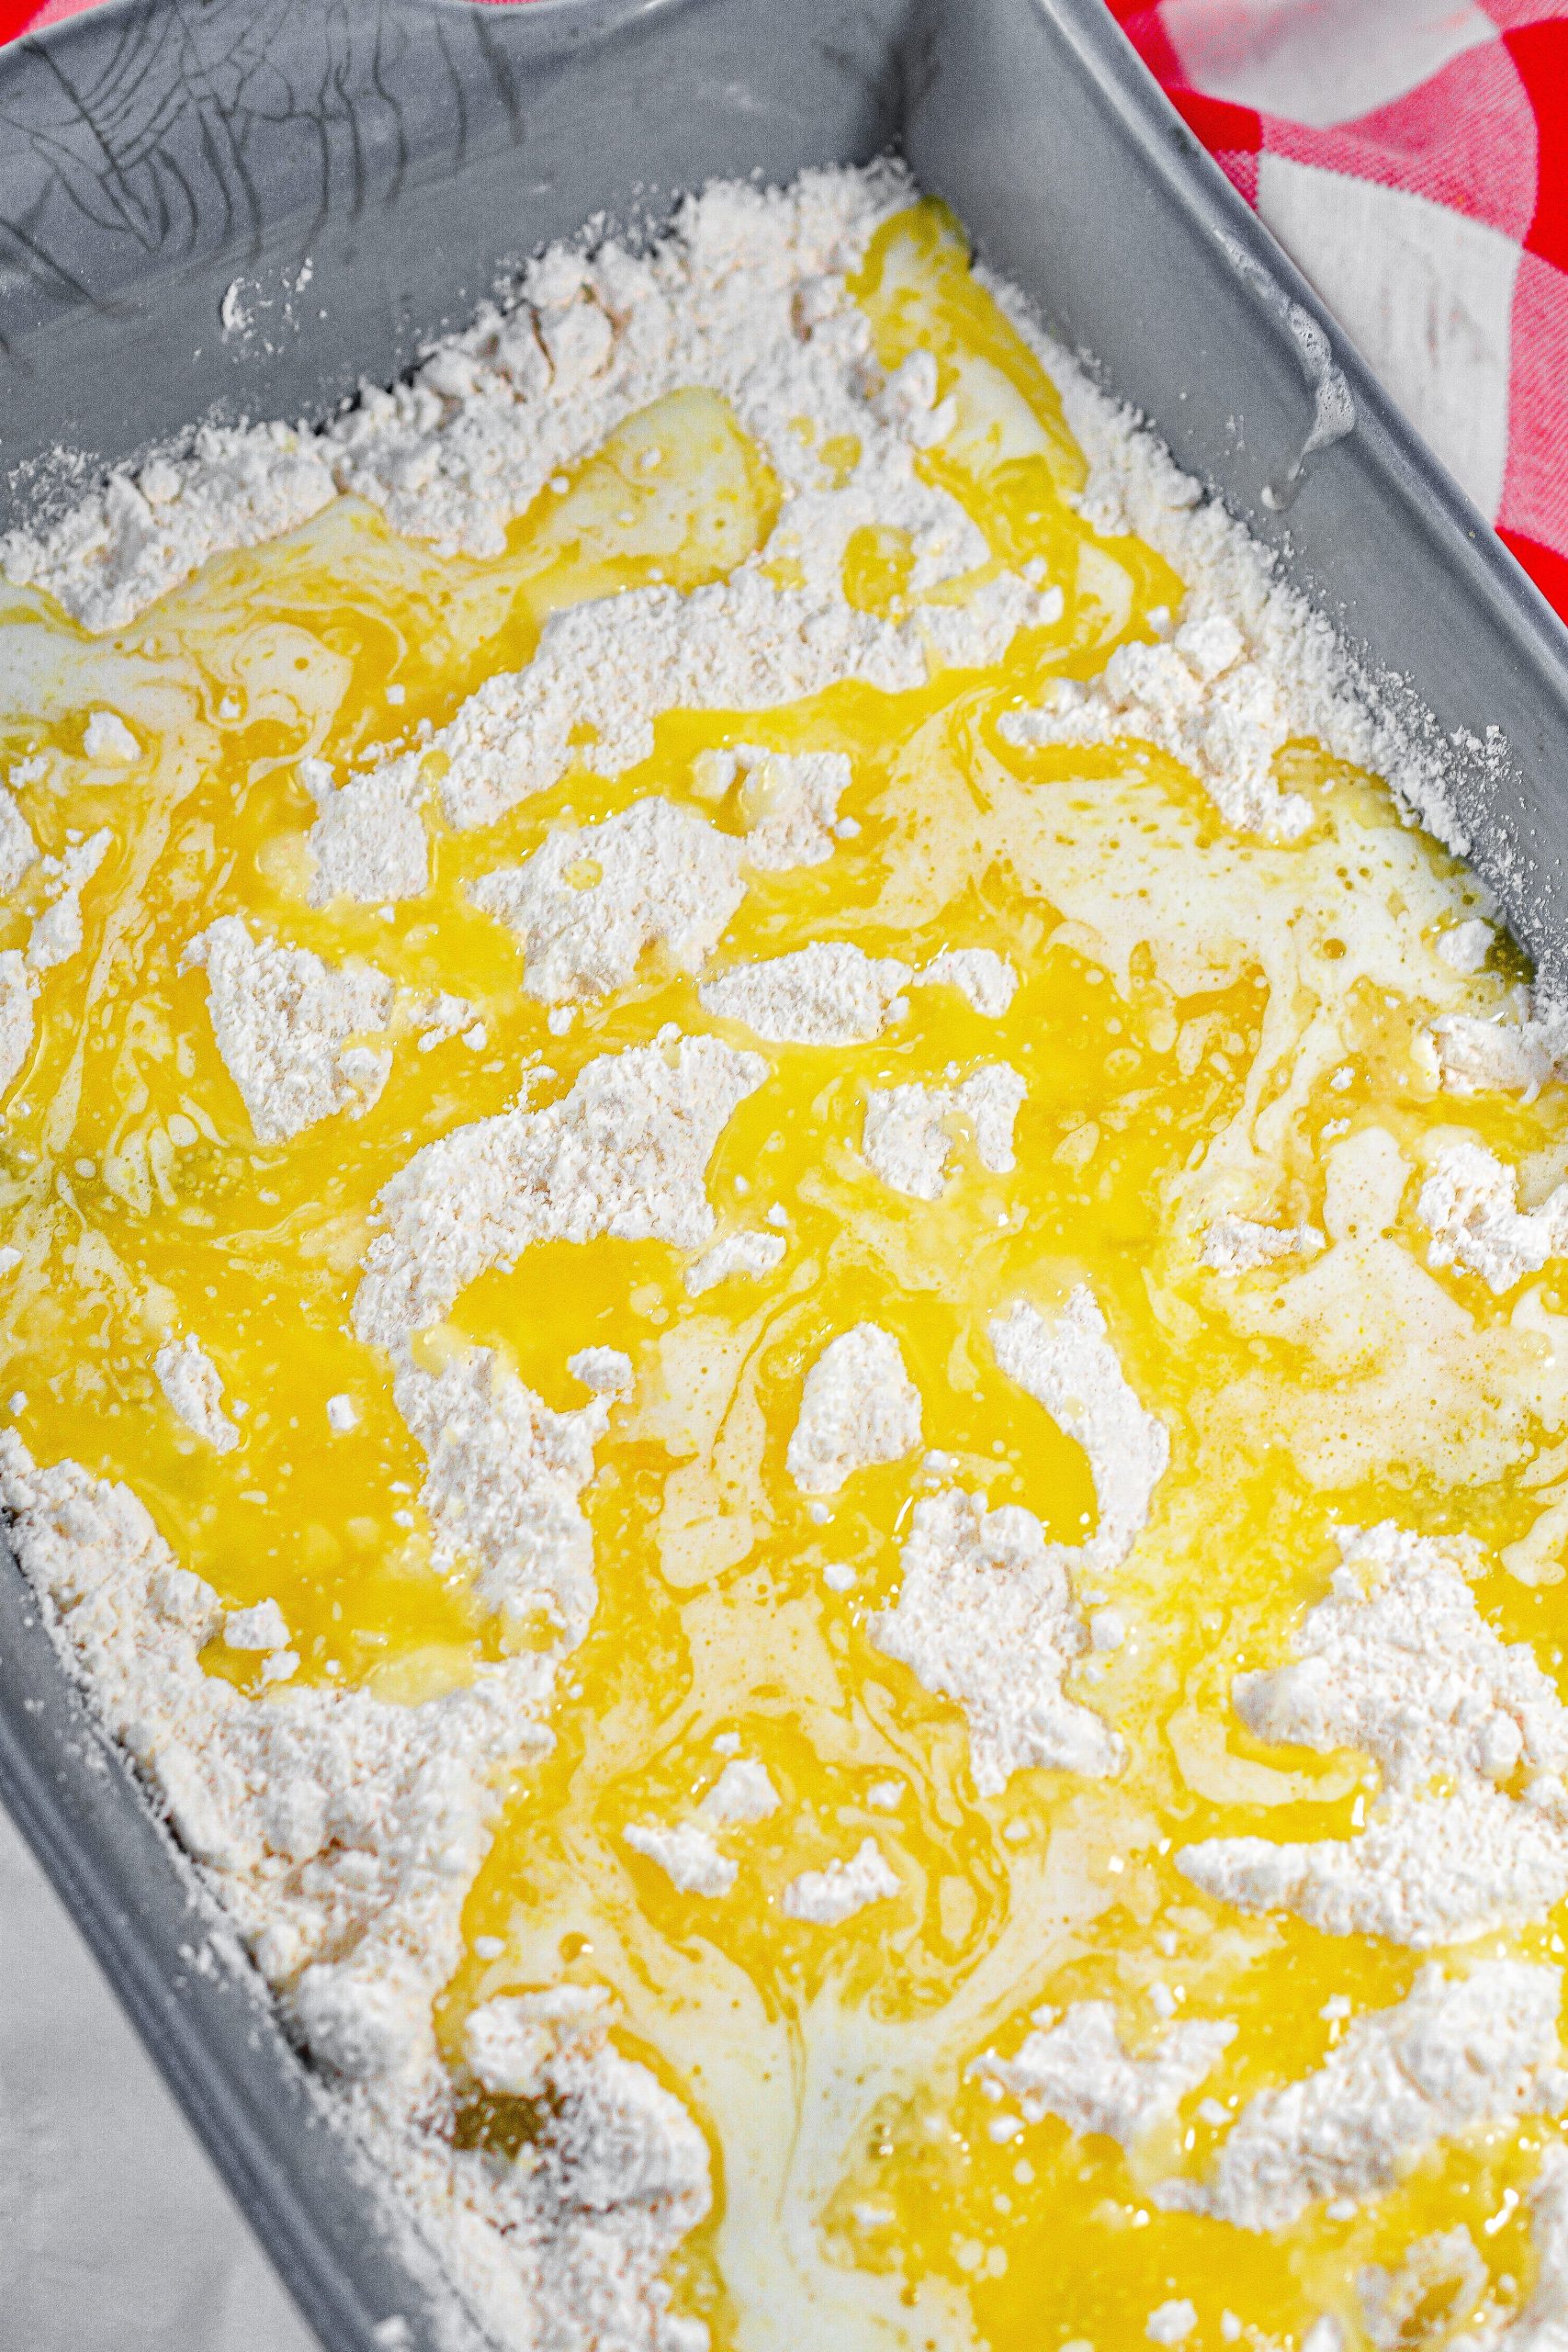 Drizzle the butter over the top of the cake mix.